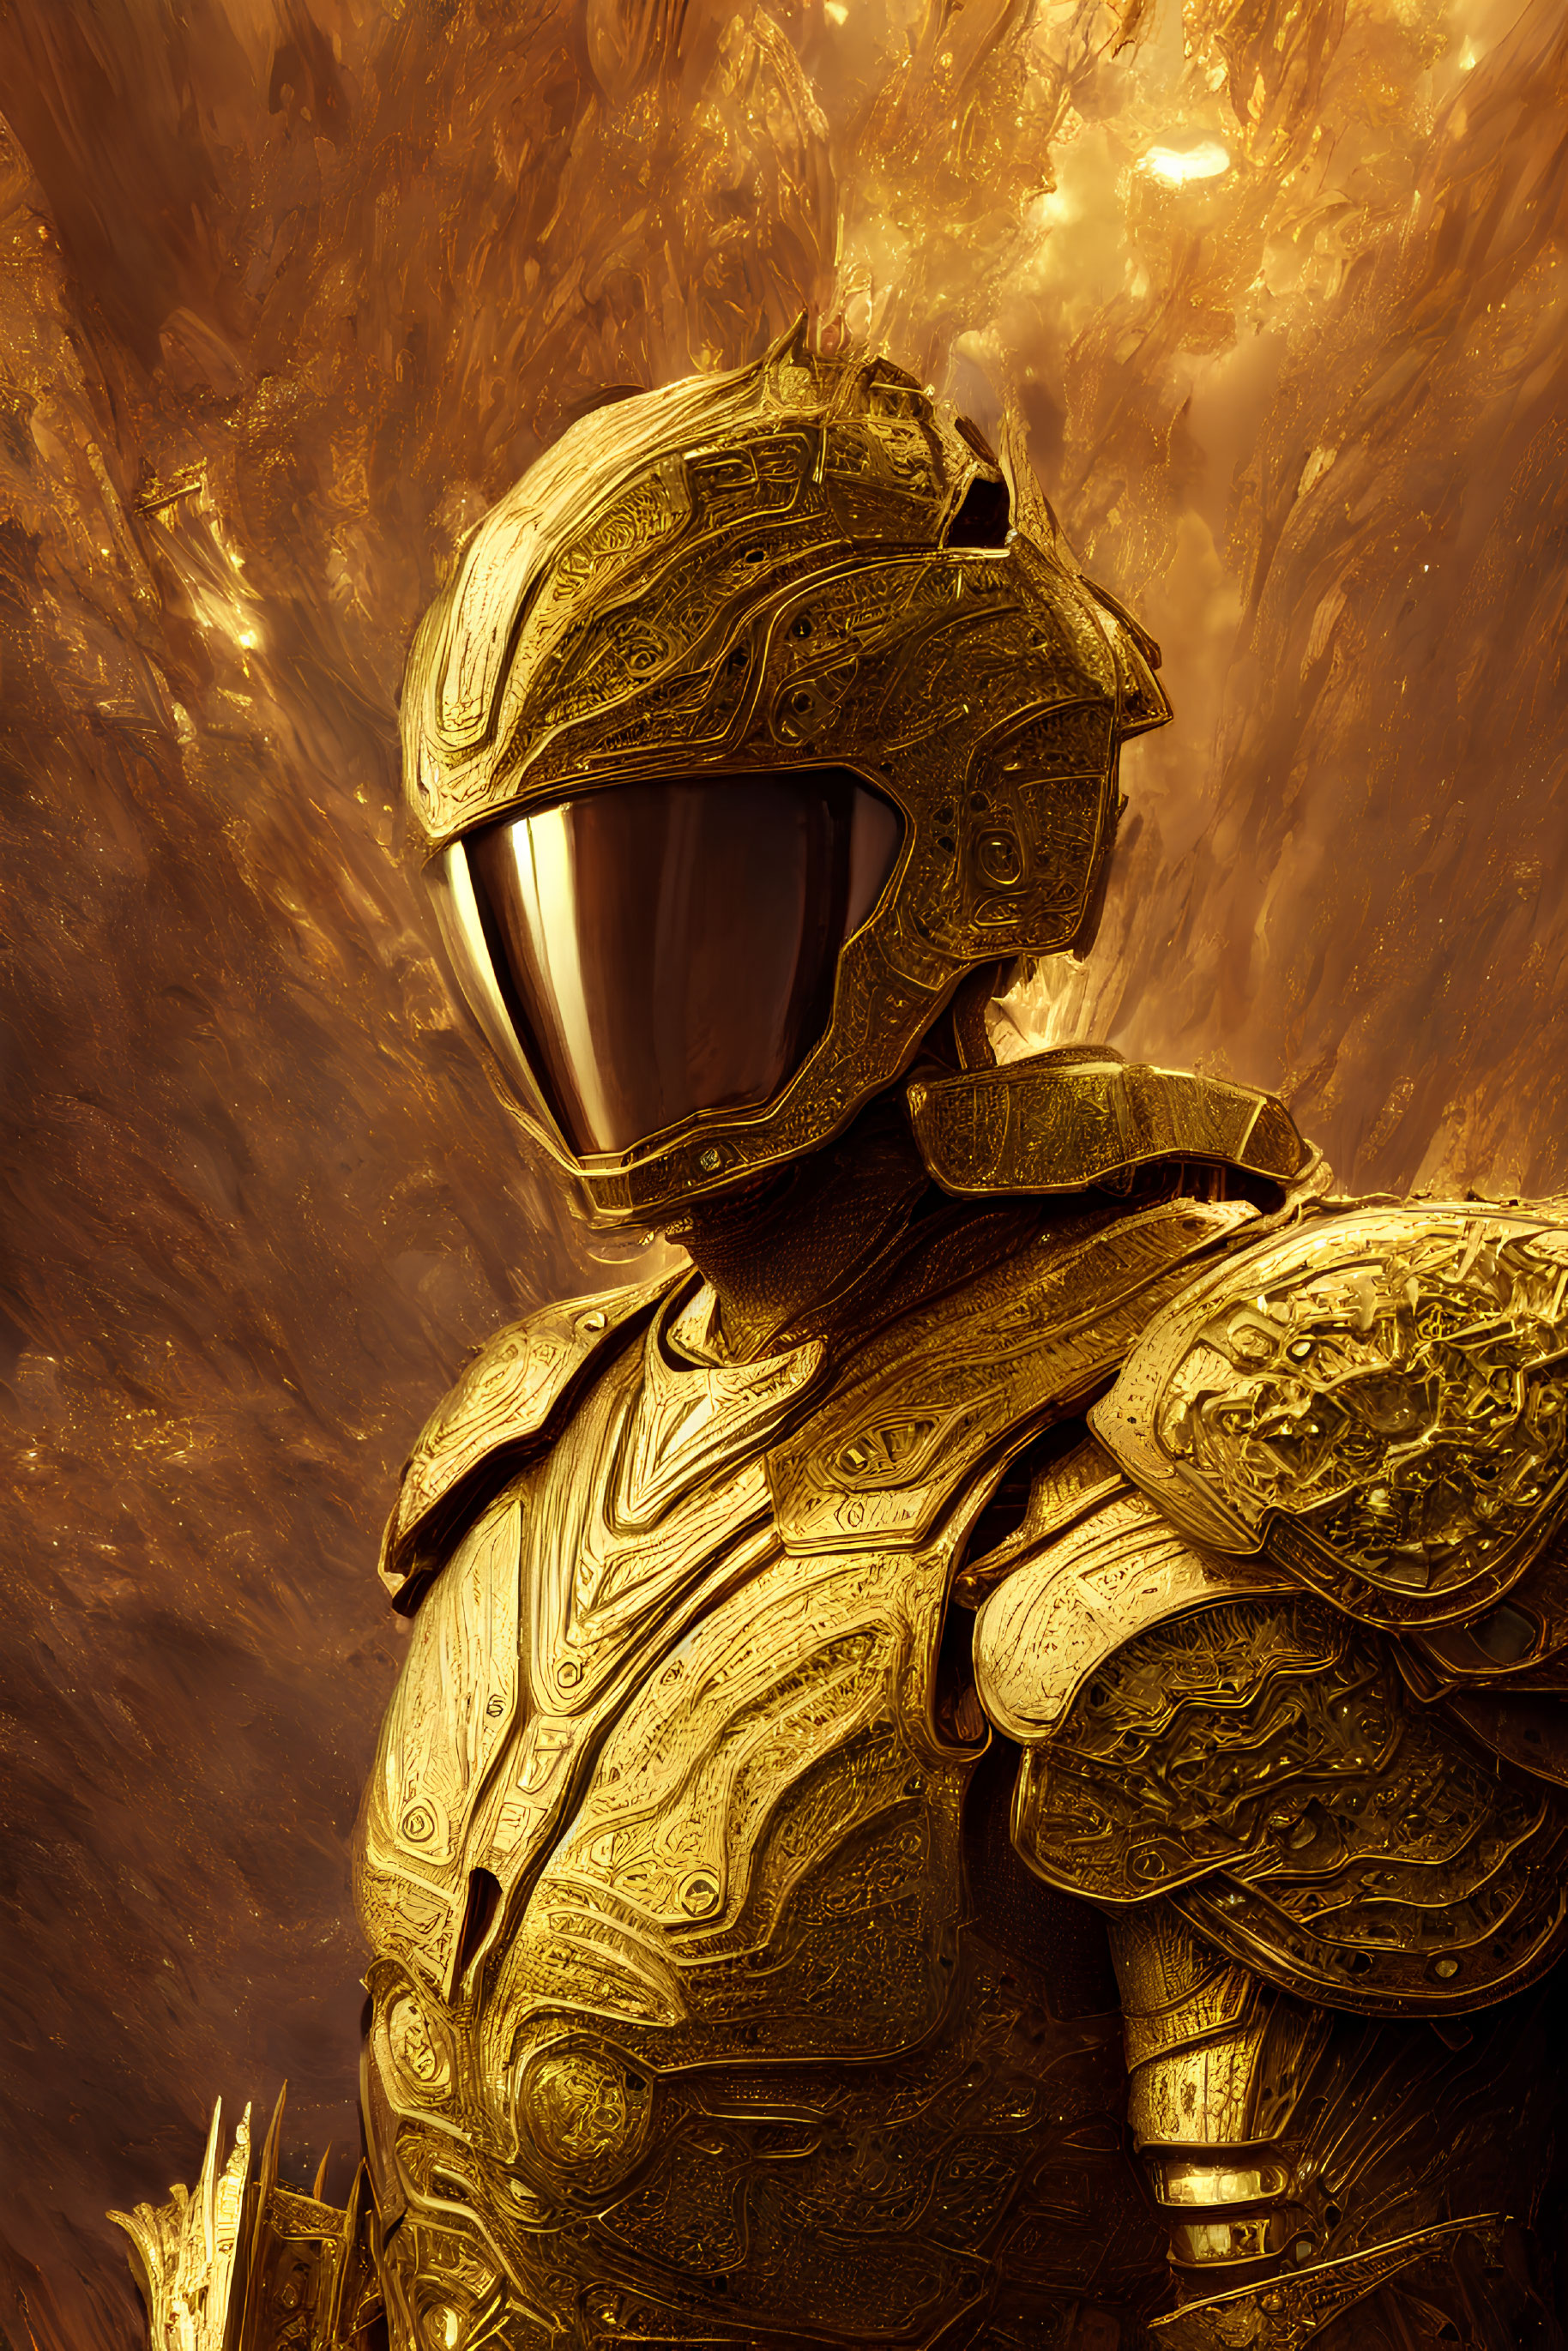 Intricate Golden Armor on Fiery Background